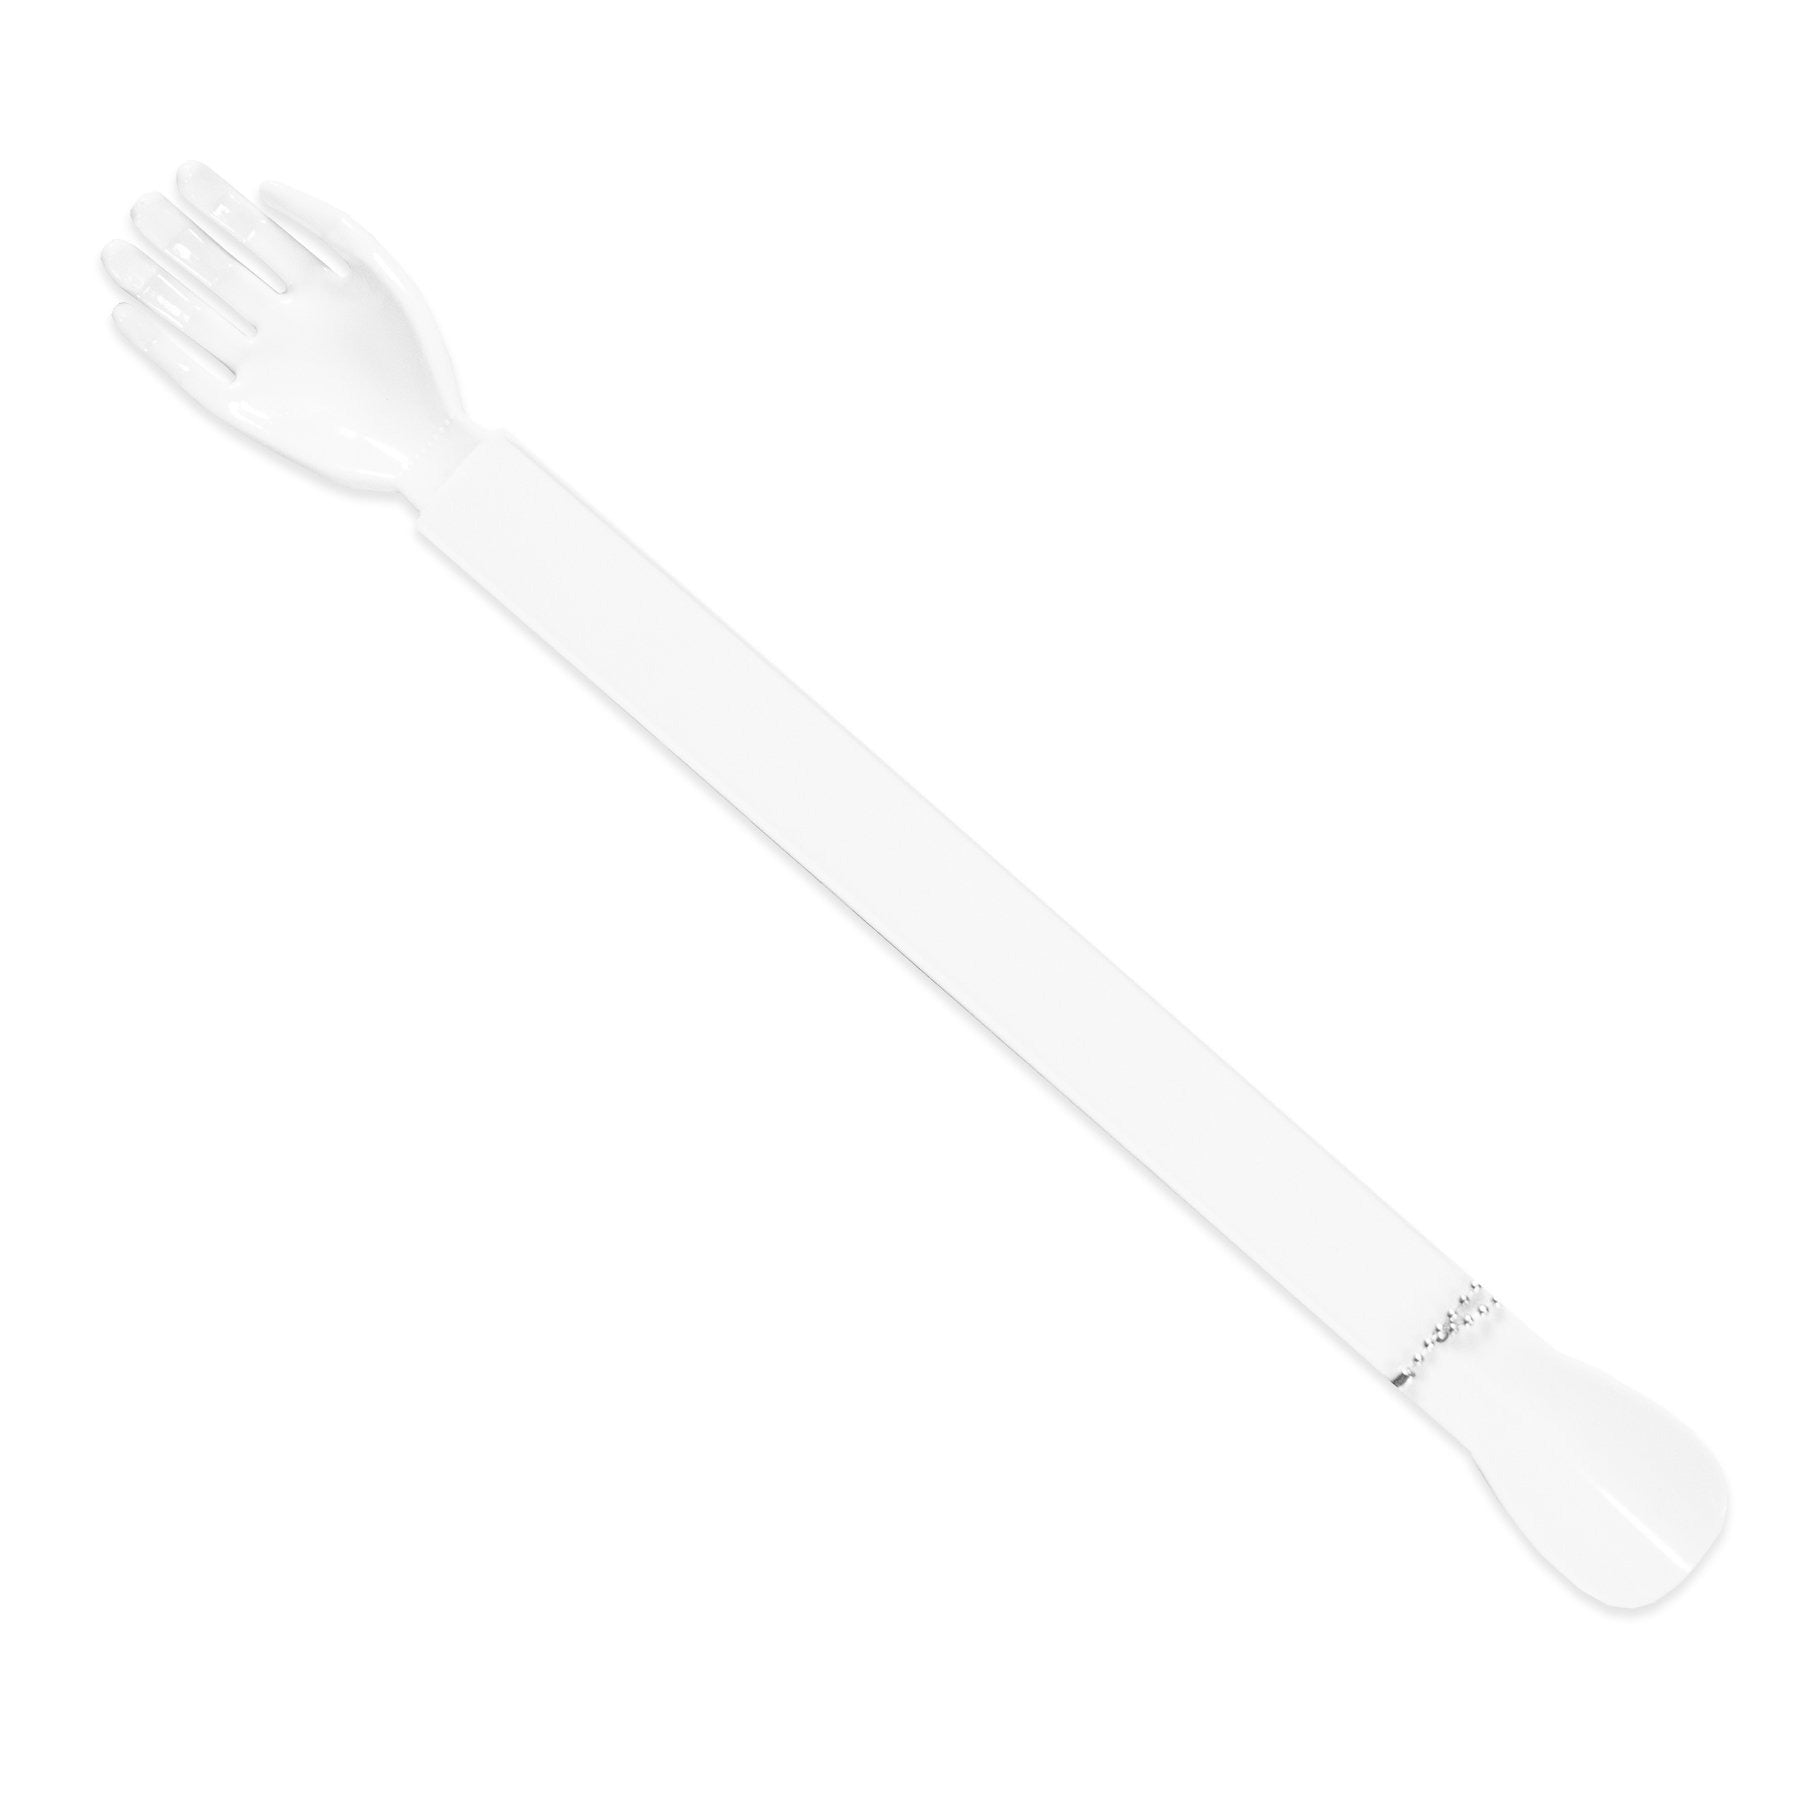 Photo of a white double ended shoe horn and back scratcher against a white background.  A chain to hang the item is visible in the picture.